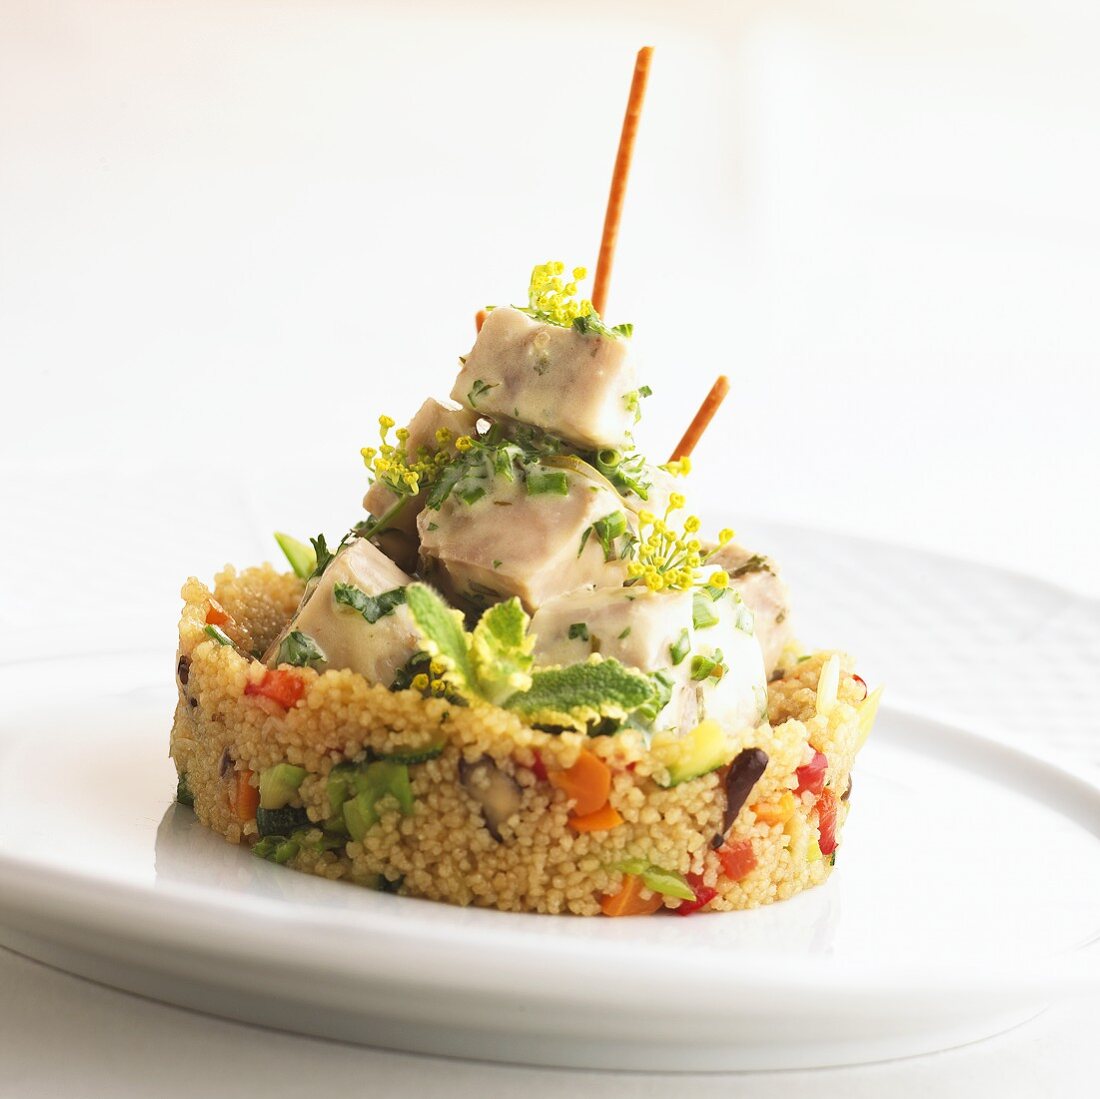 Couscous with rabbit and vegetables